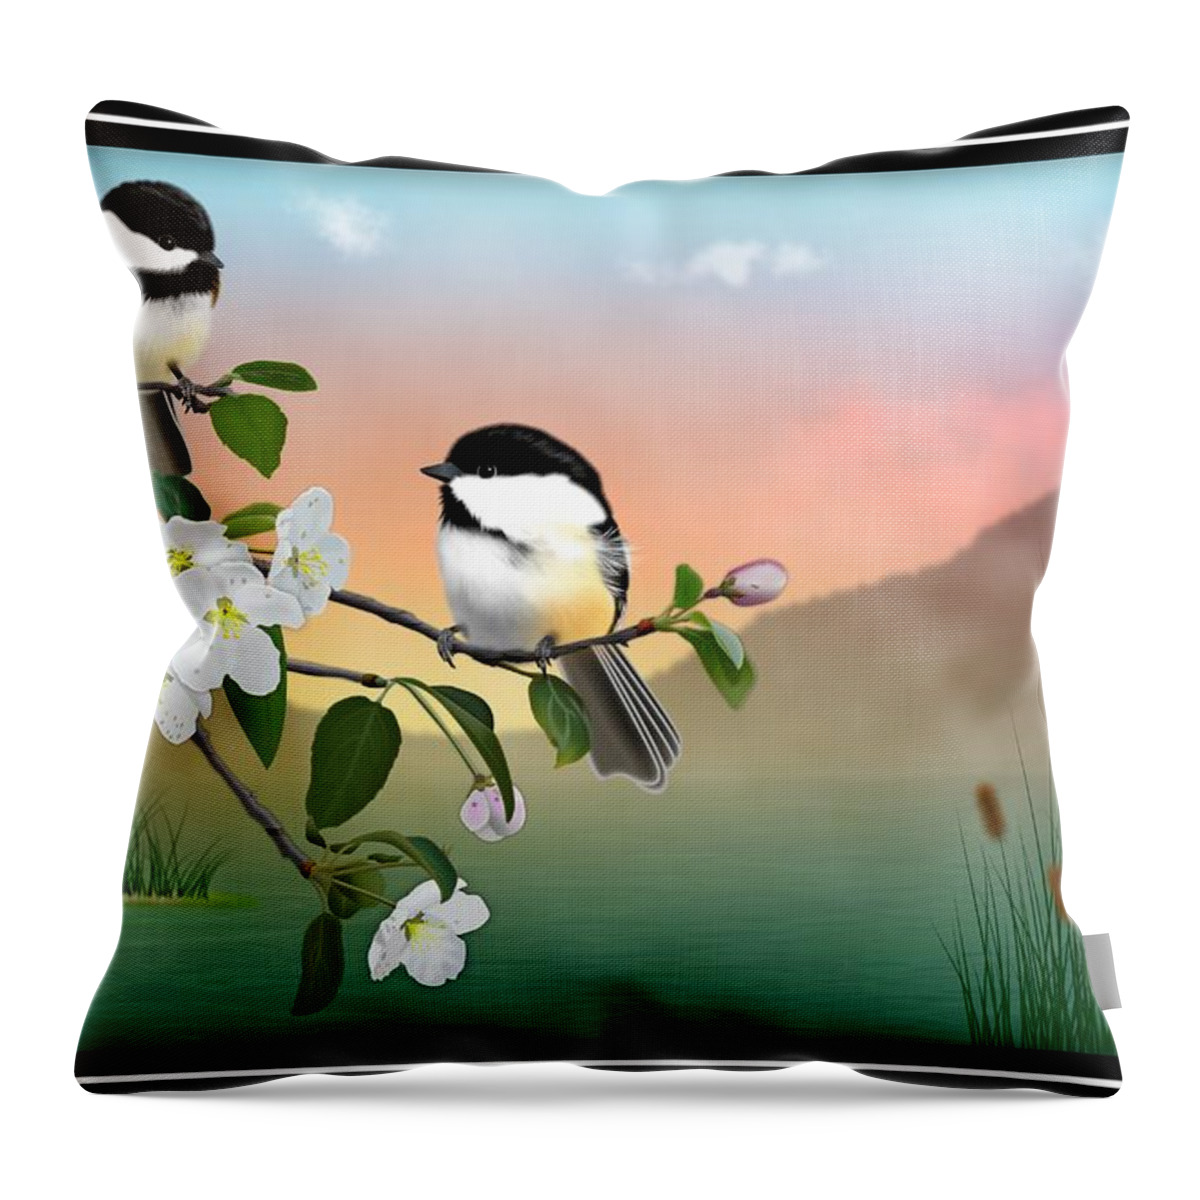 Chickadee Throw Pillow featuring the digital art Chickadees and Apple Blossoms by John Wills